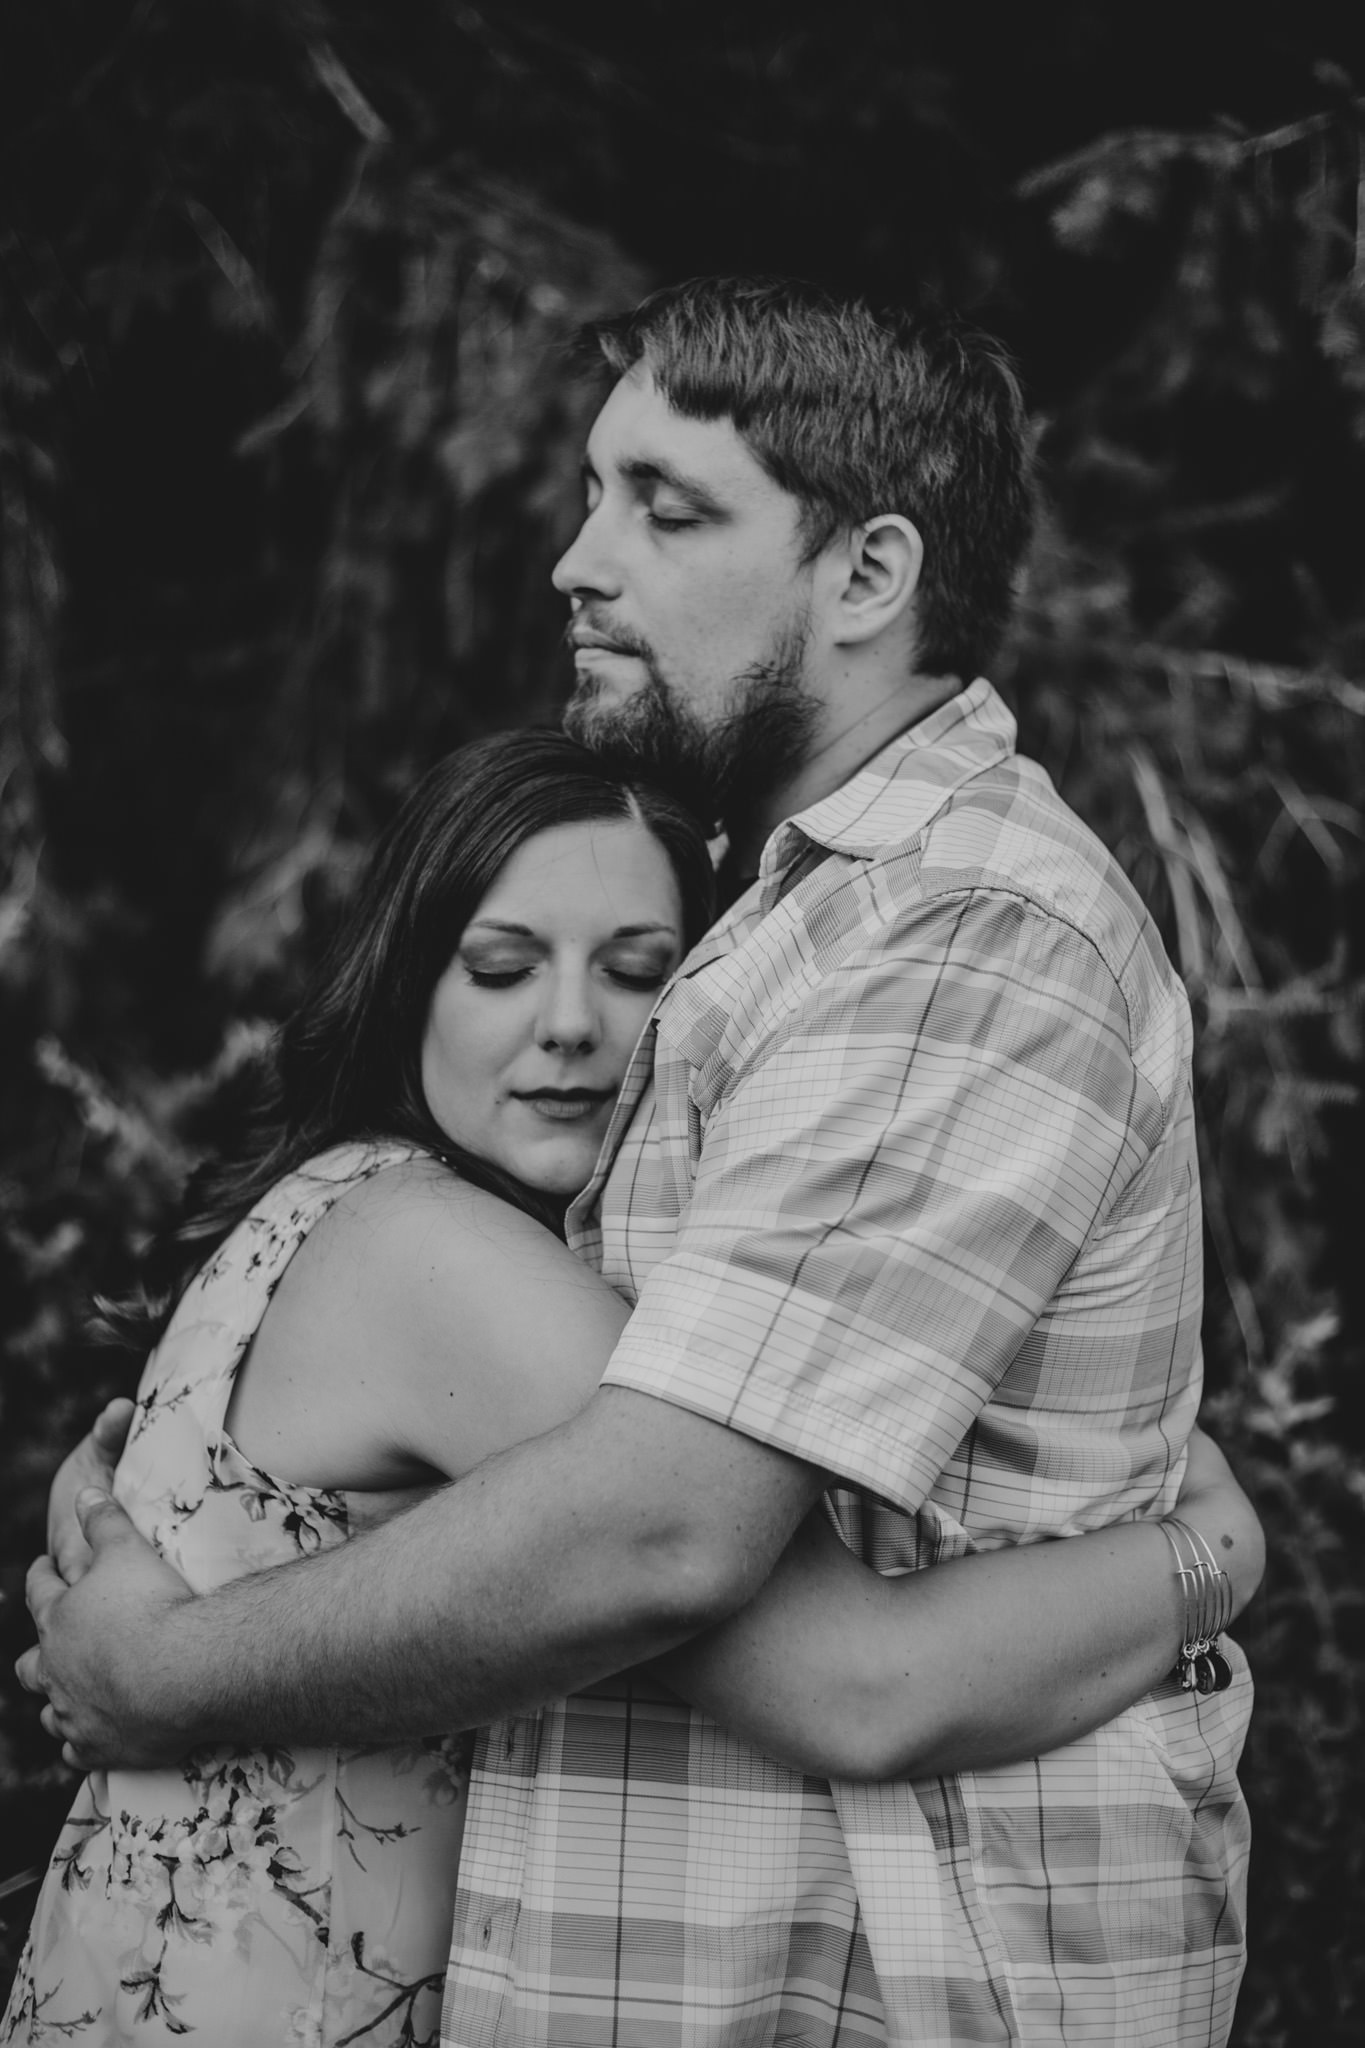 Green Lakes State Park in Fayeteville, NY is a beautiful location for engagement photos